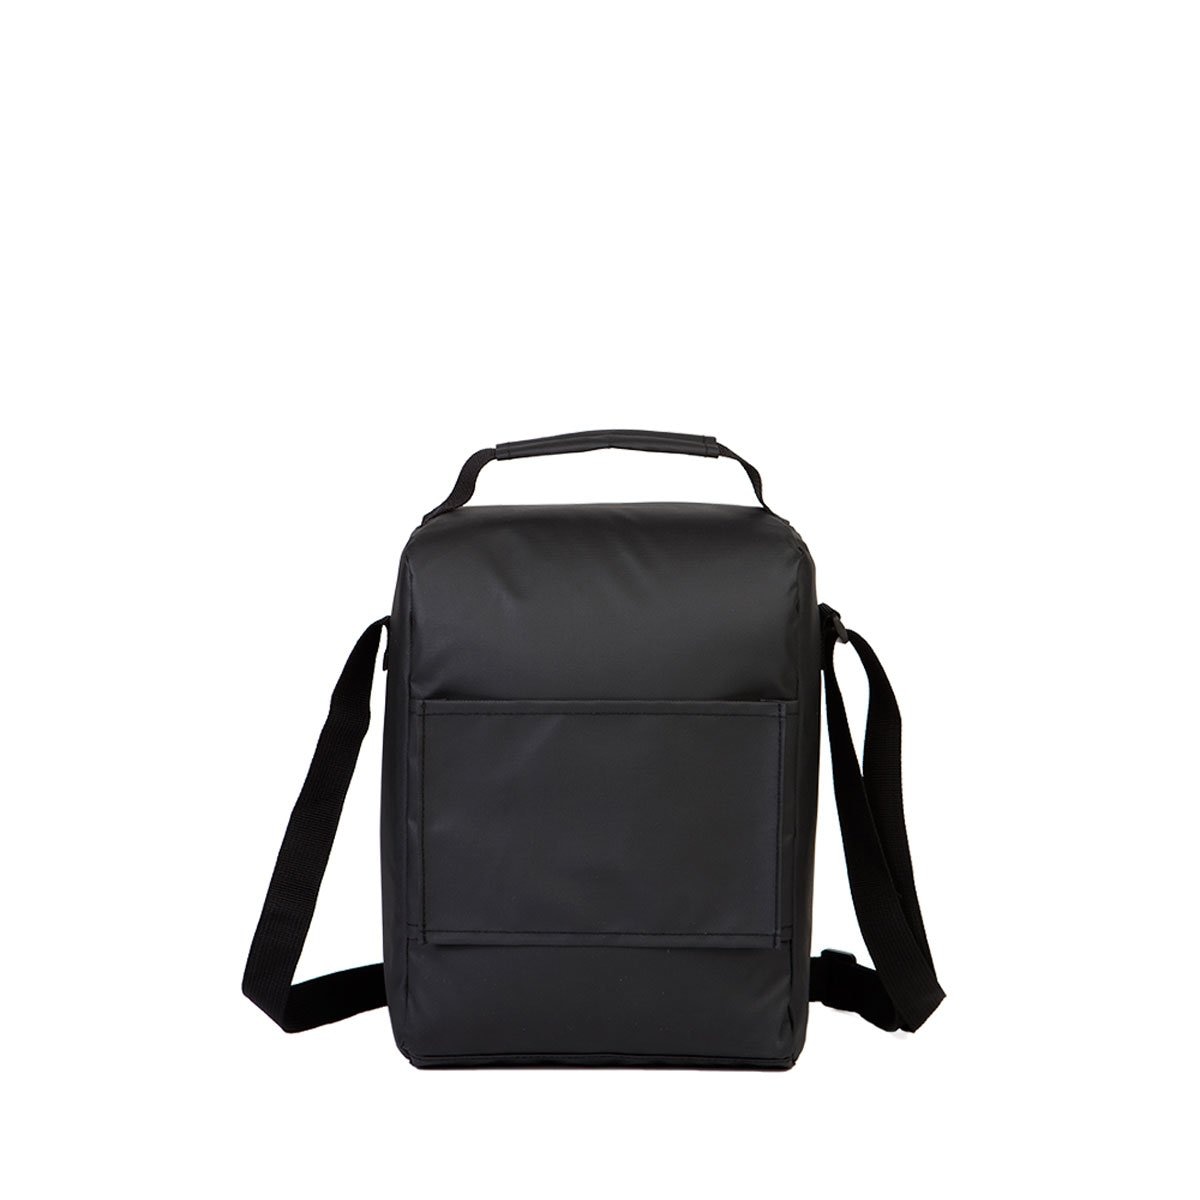 Lonchera Lunch Lunch Bag Reverse Ng Xtrem